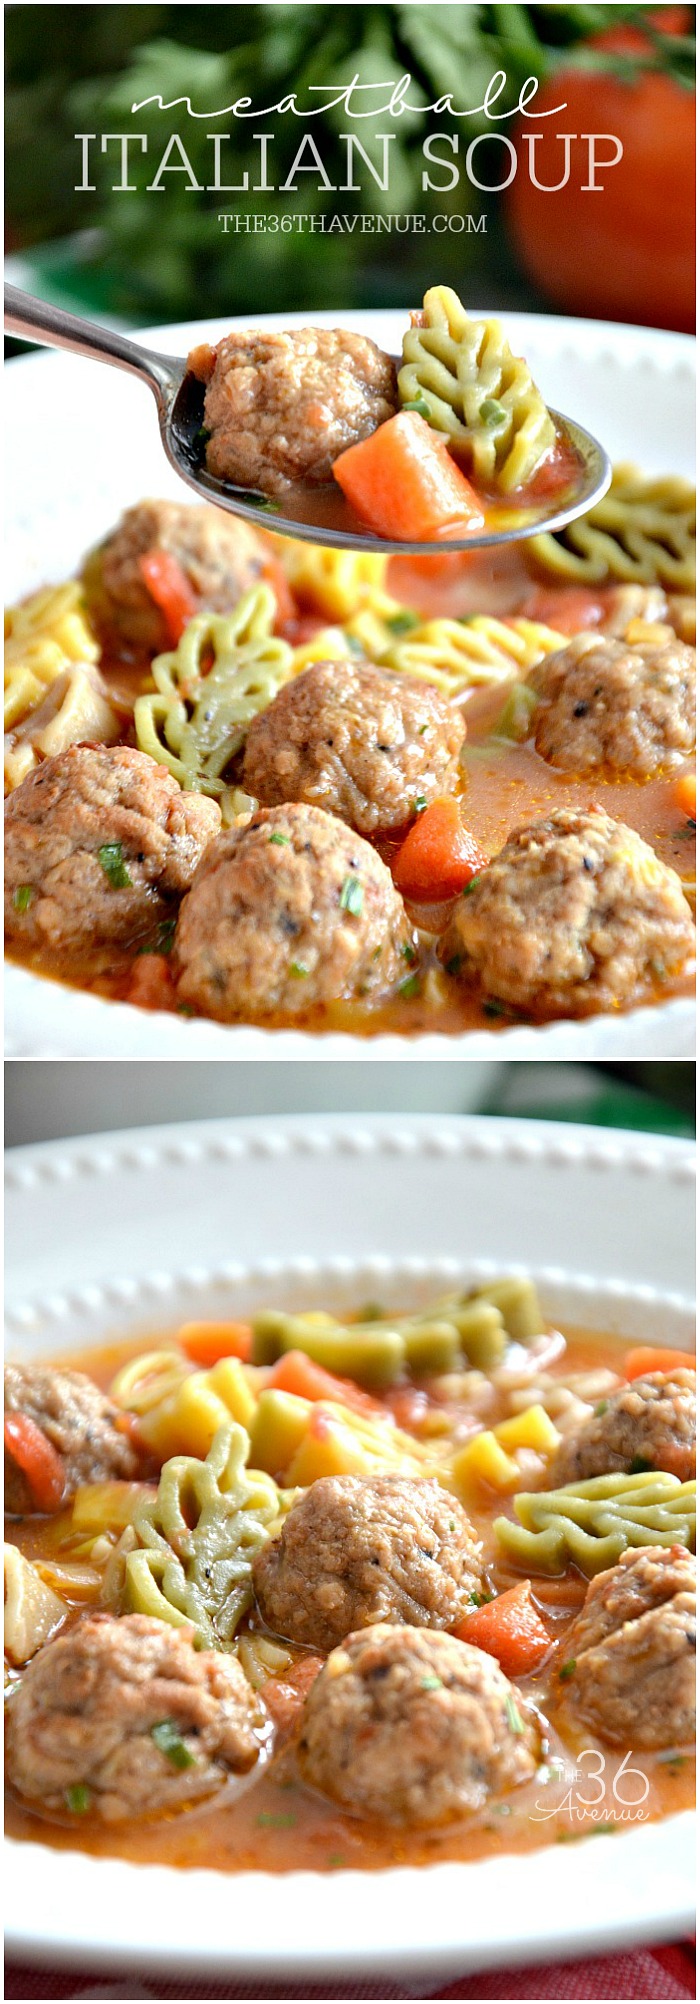 Meatball Italian Soup Recipe - This delicious One Pot Soup is super easy to make and ready in 30 minutes or less! I love easy soup recipes! PIN IT NOW and make it later! 